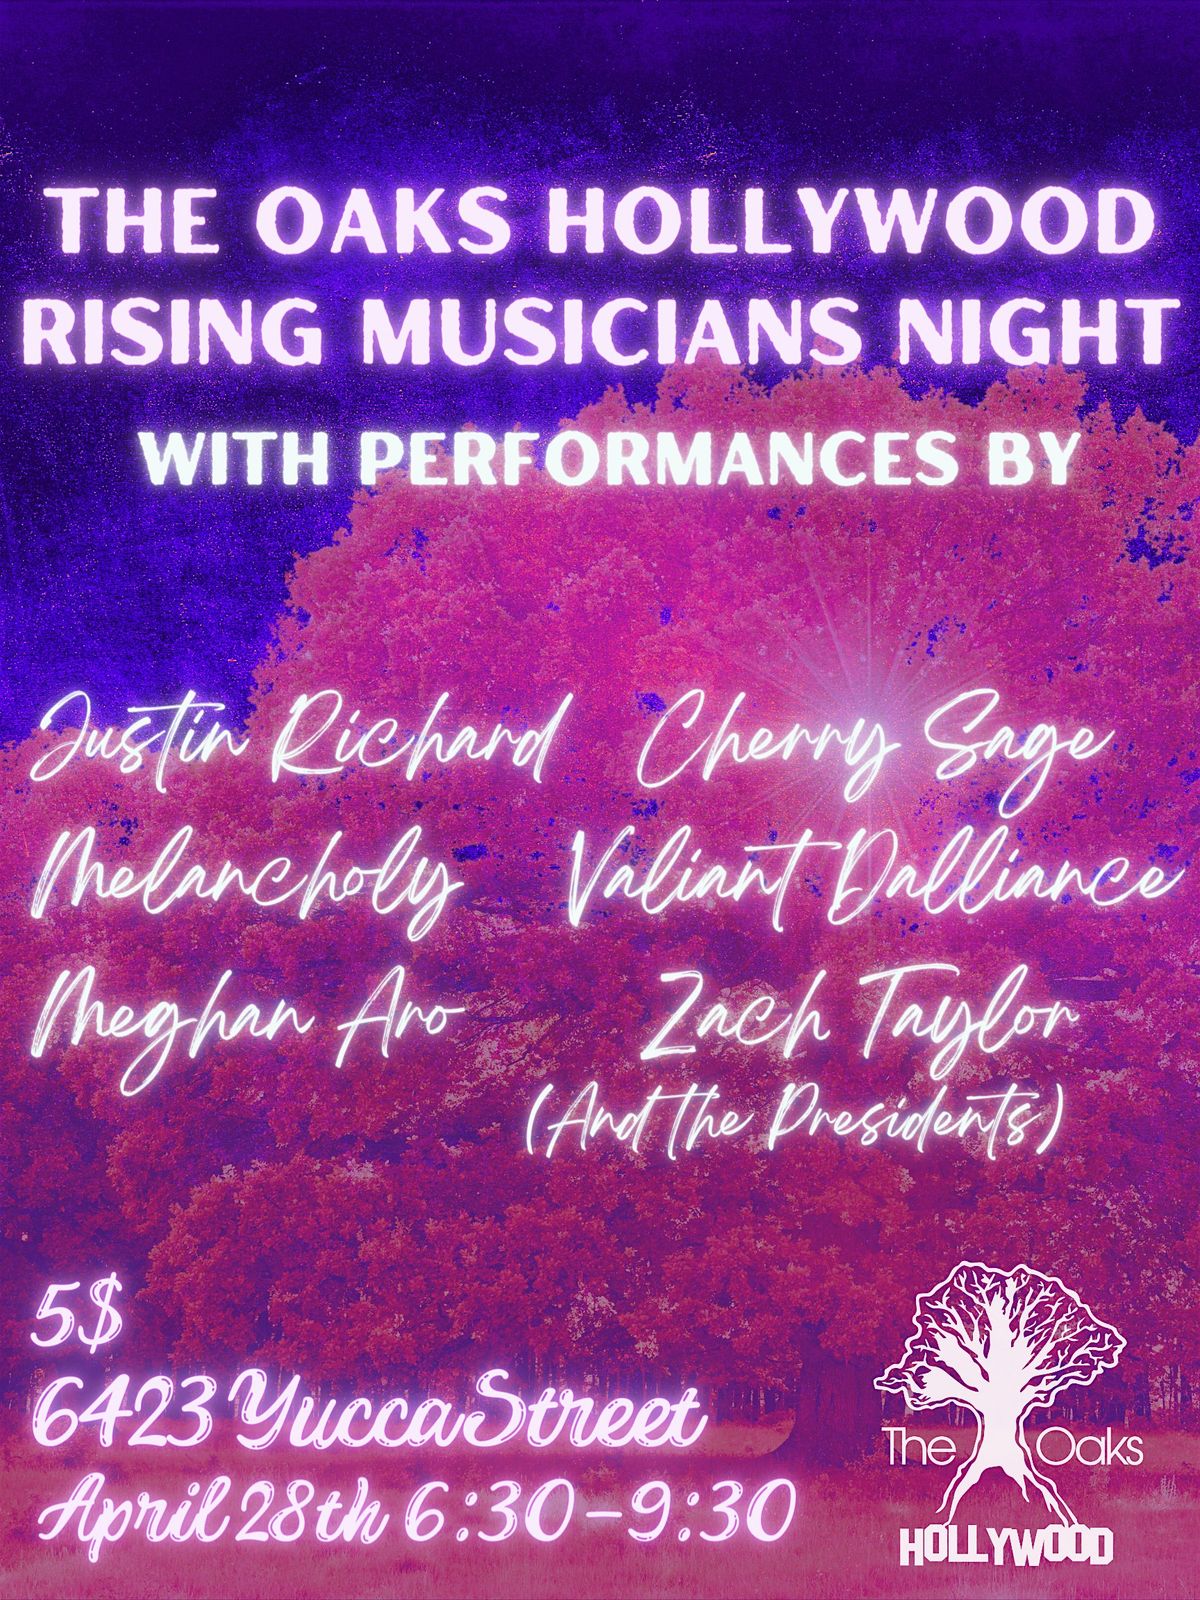 The Oaks Hollywood Rising Musicians Night